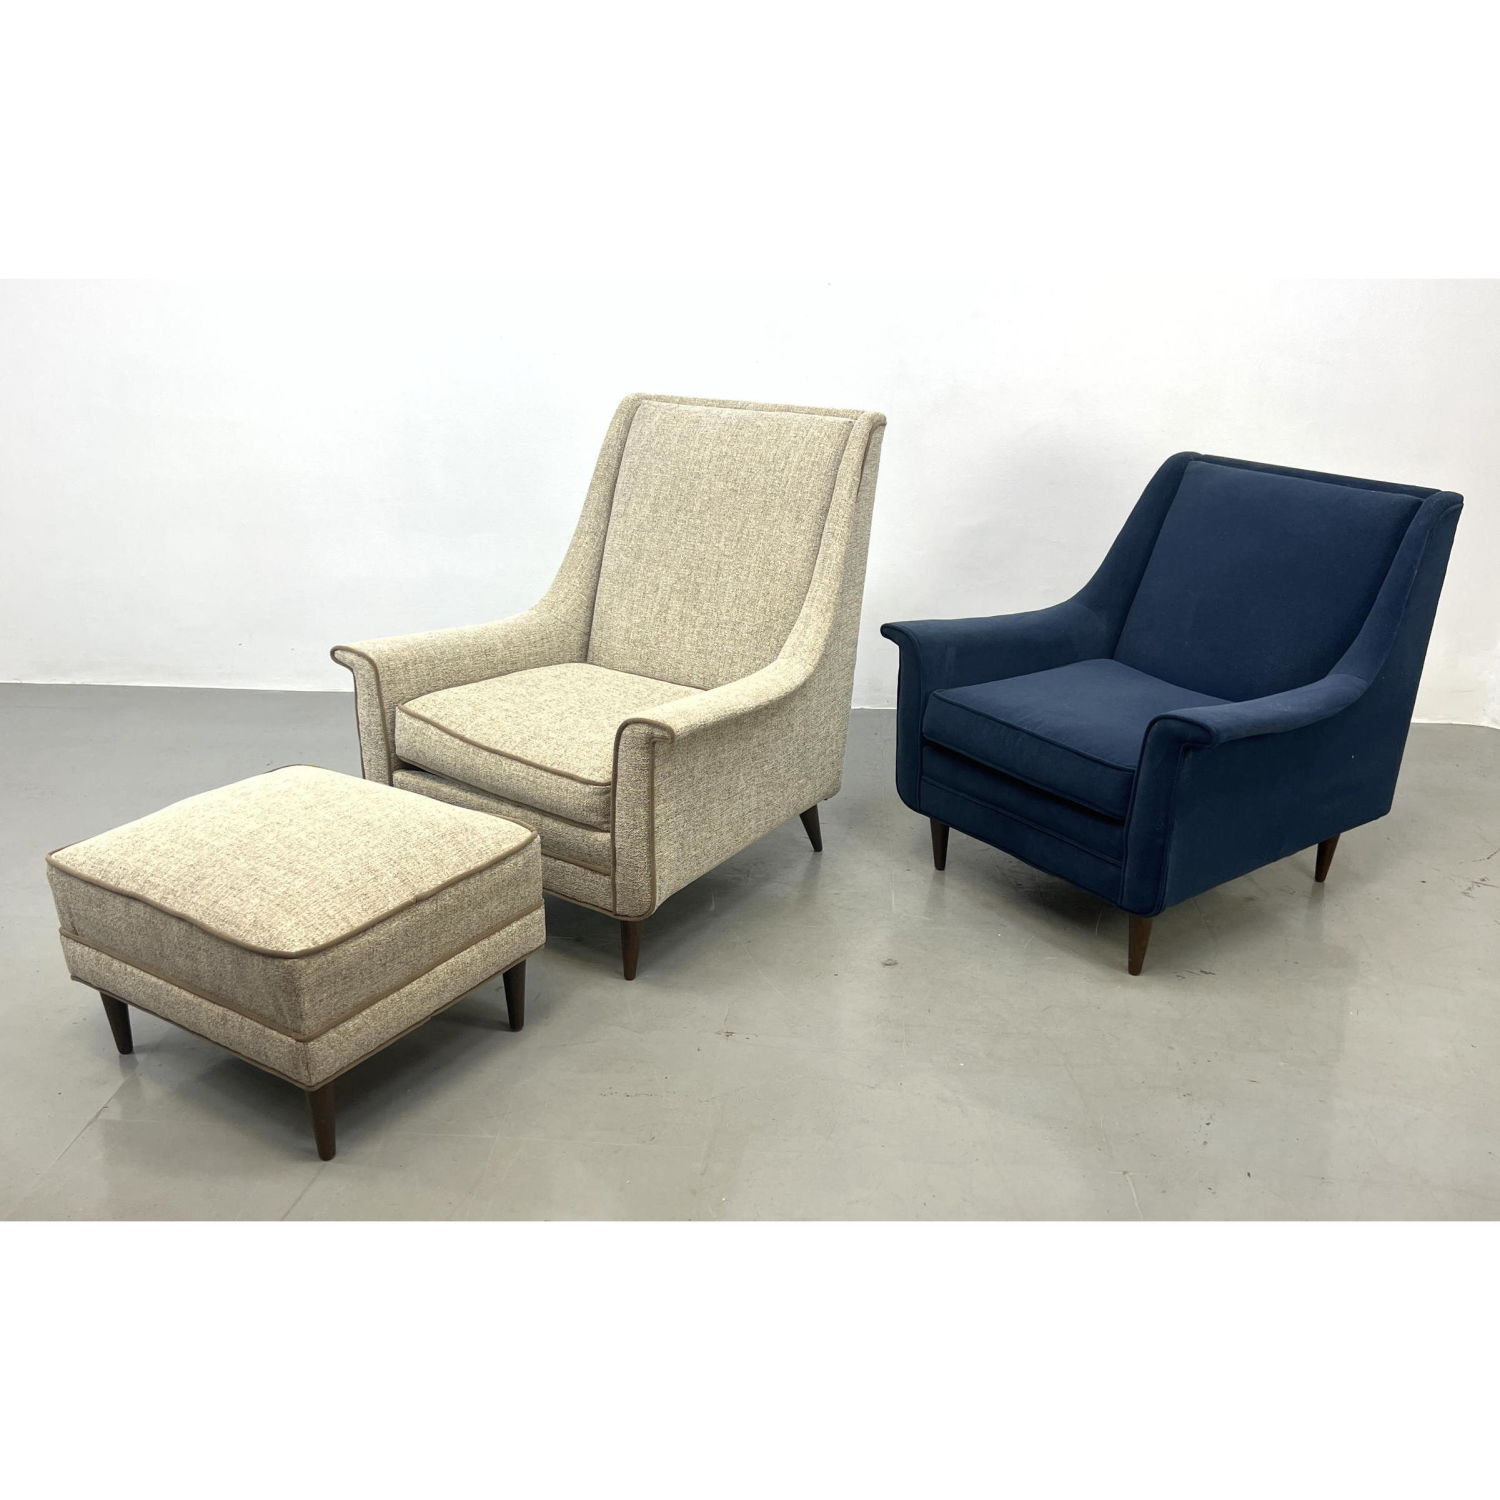 3pc His and Hers Lounge Chairs